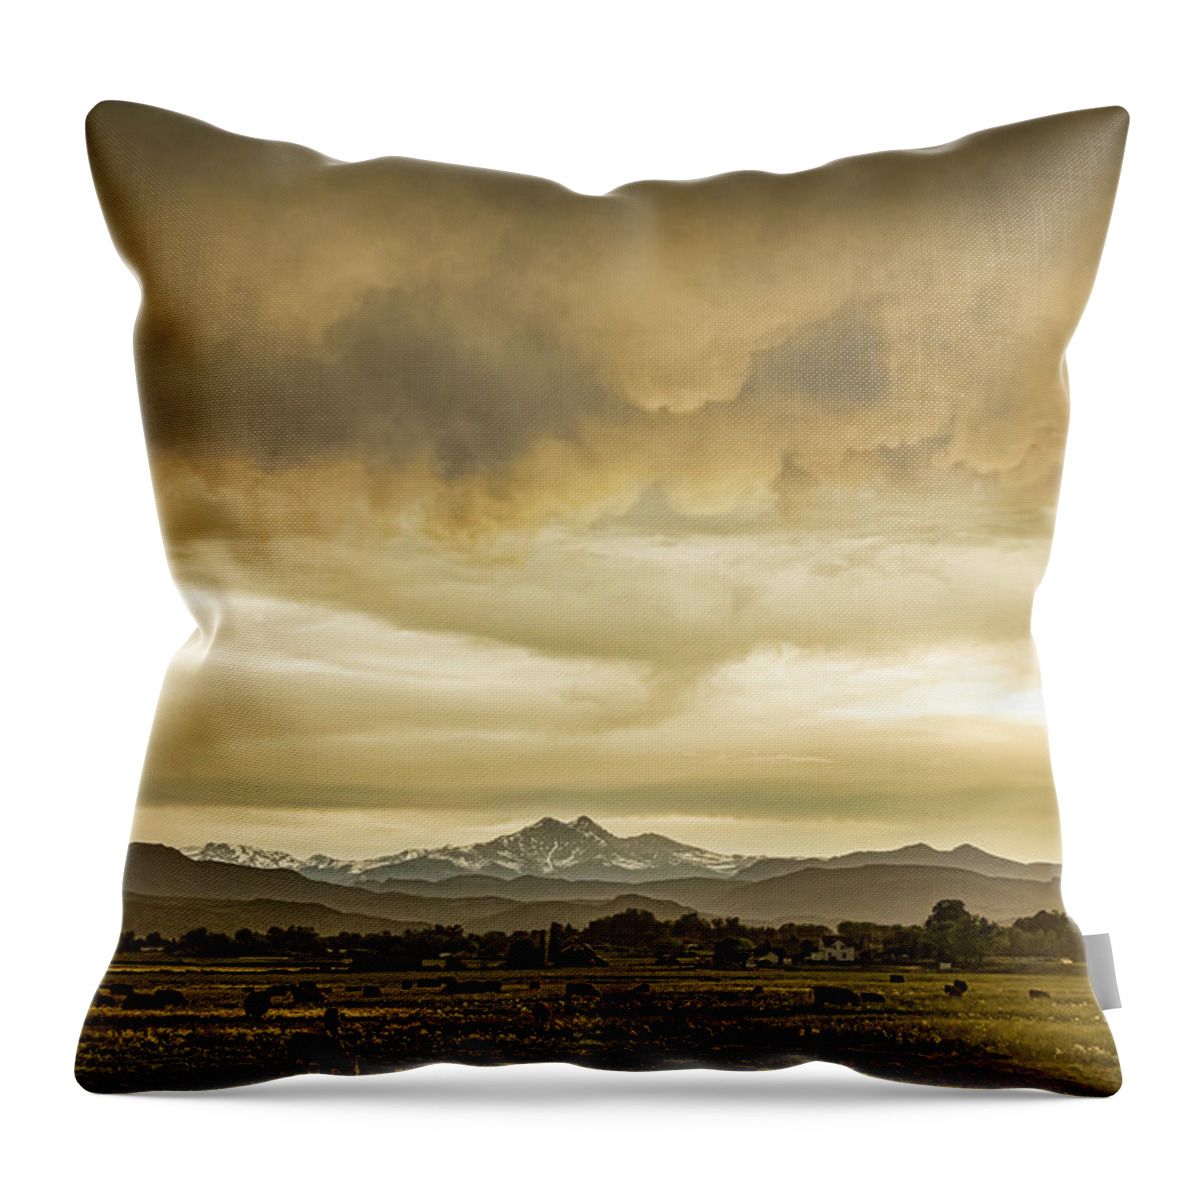 Severe Throw Pillow featuring the photograph Colorado Grazing by James BO Insogna